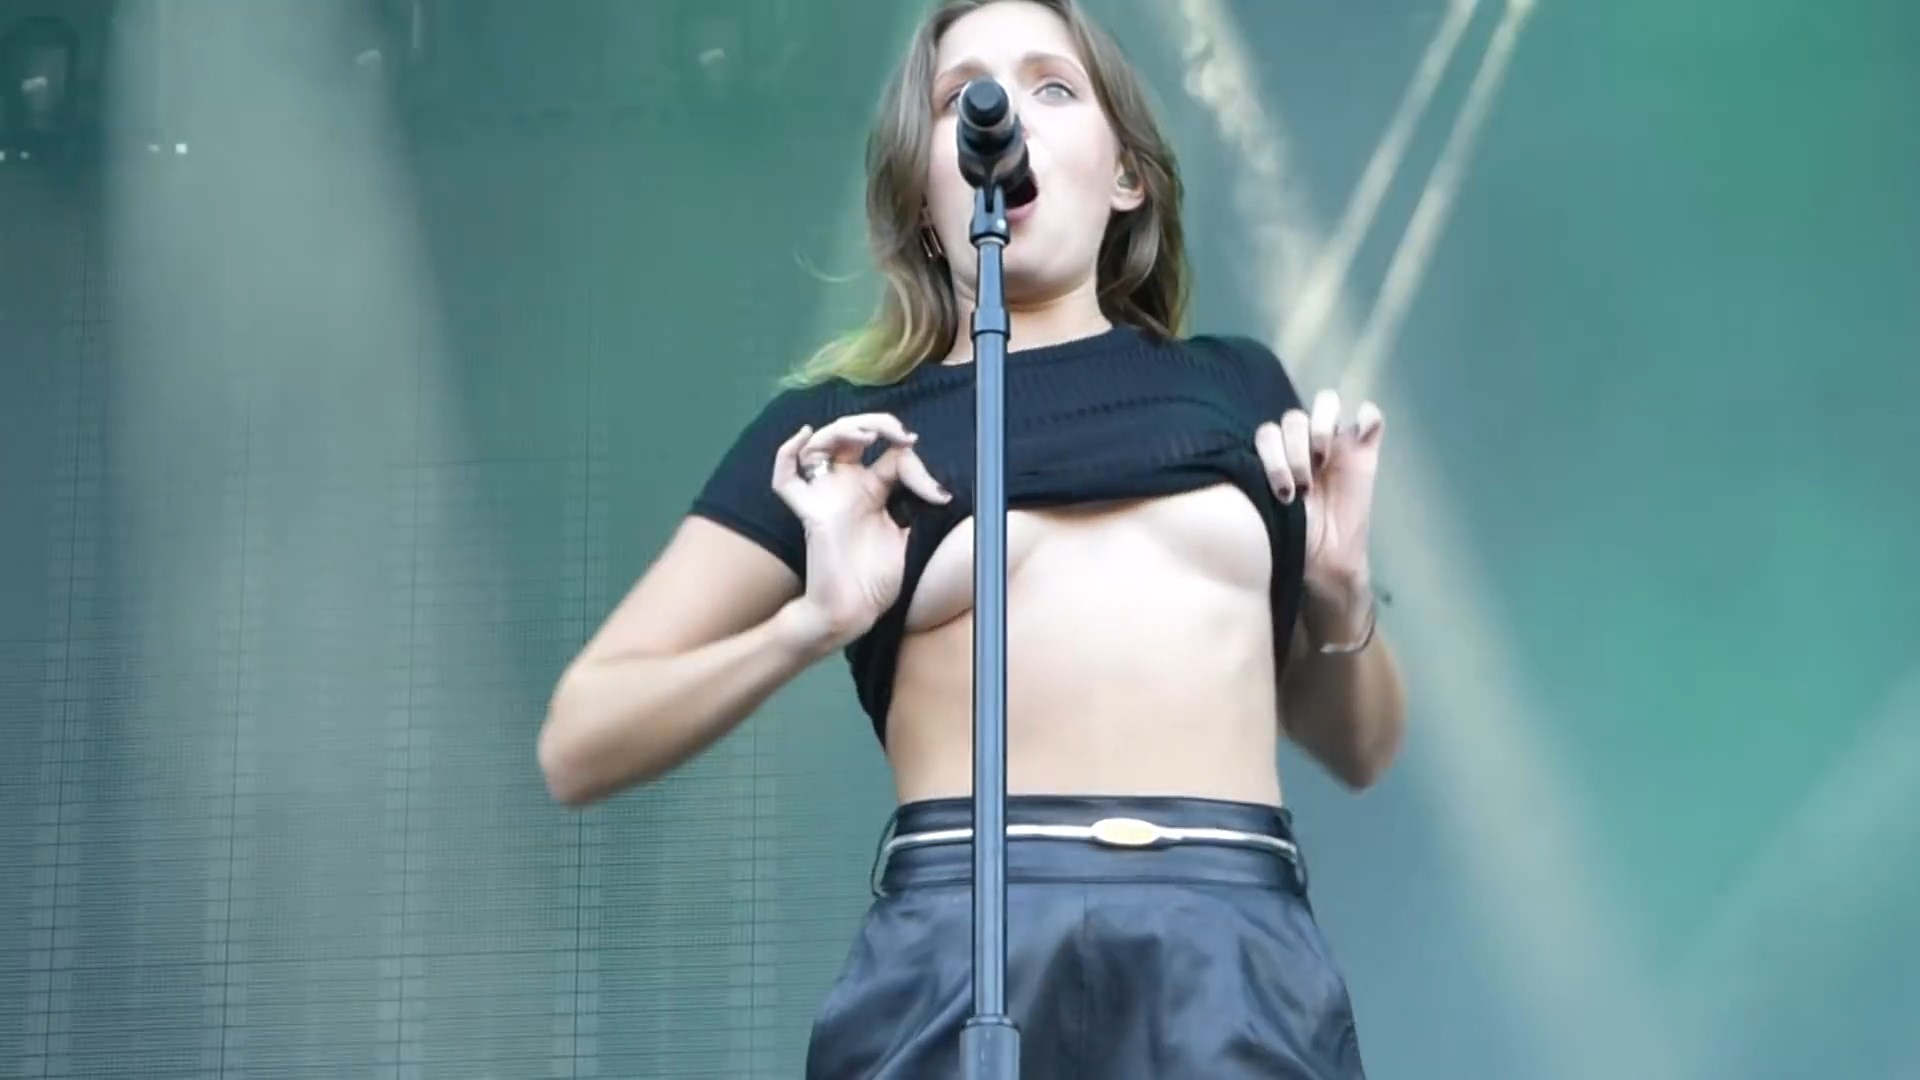 Tove Lo Tits Tits 9 18 15 Video Photo The Fappening 2014 2019 Celebrity Photo Leaks